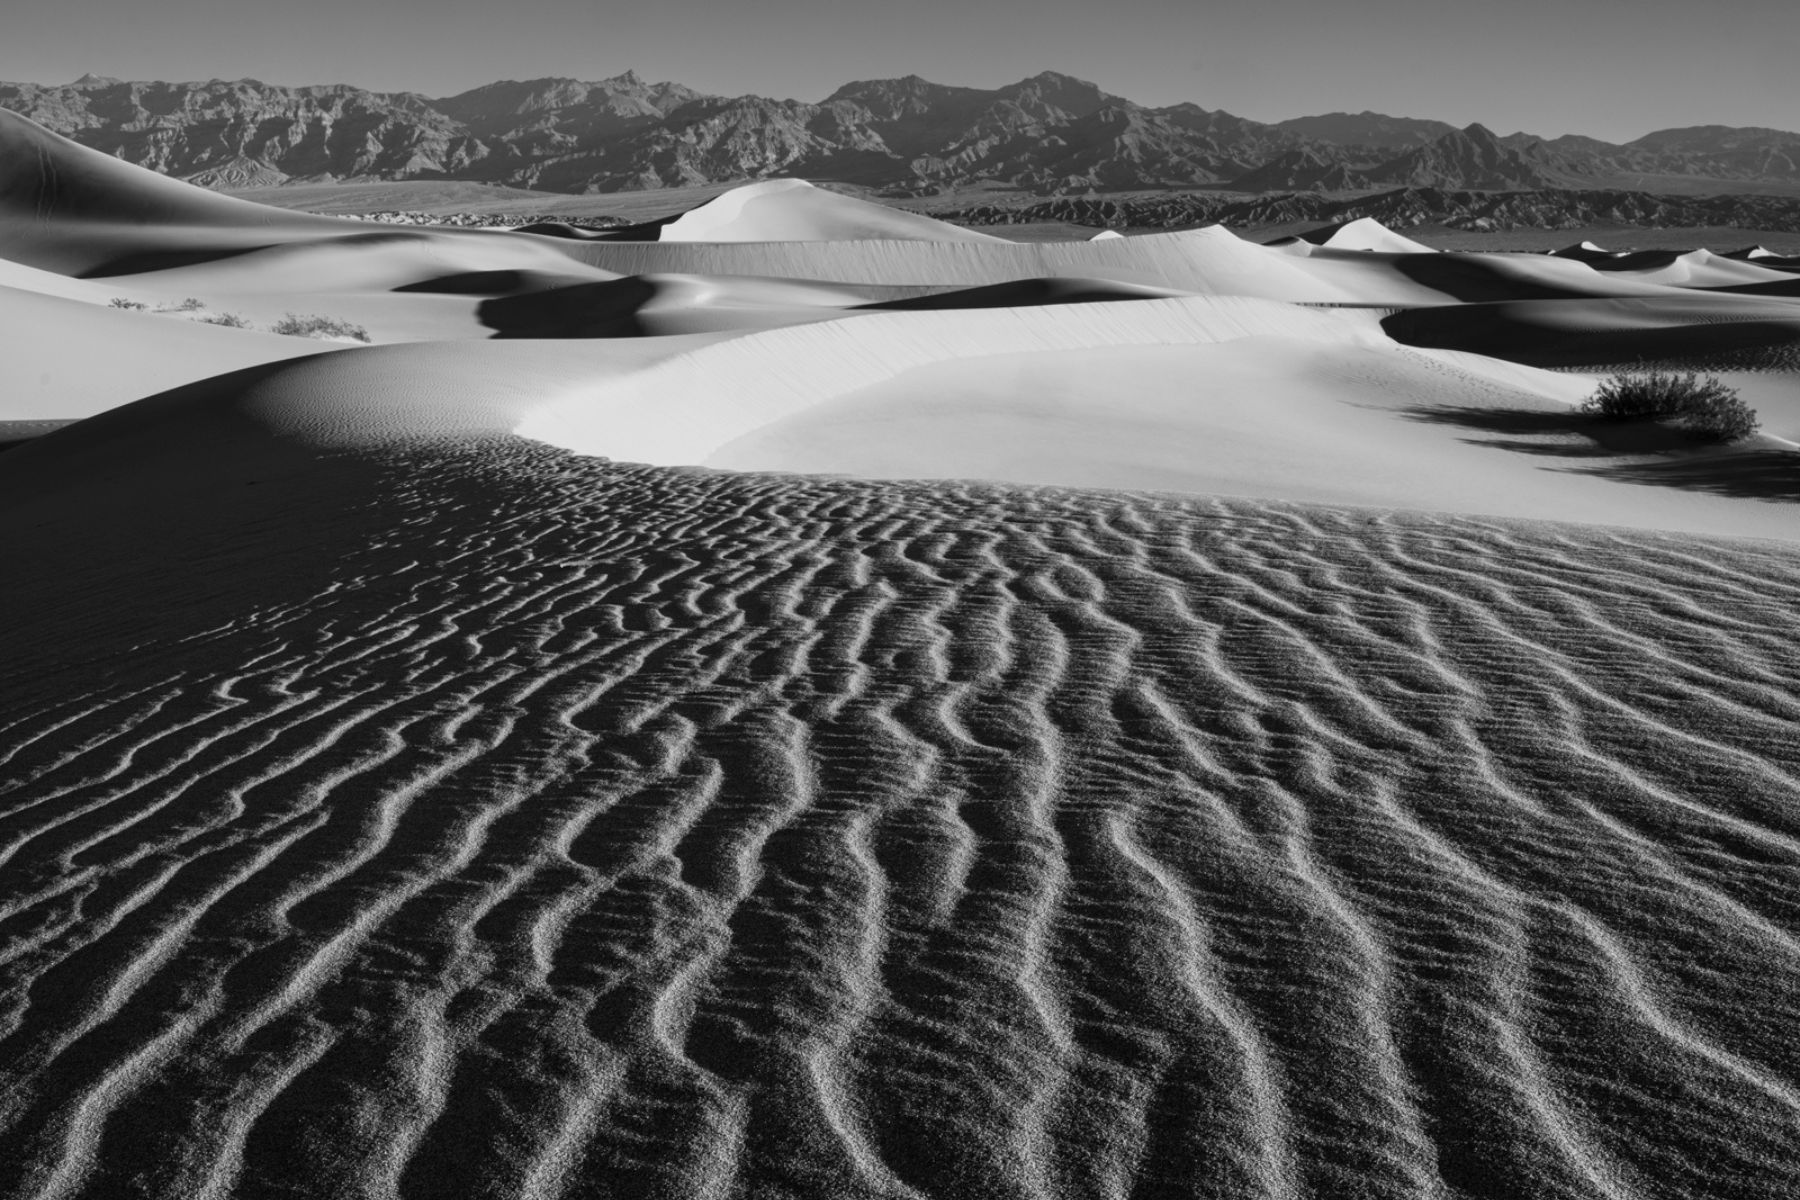 Death Valley: Land of Extremes Photo Workshop